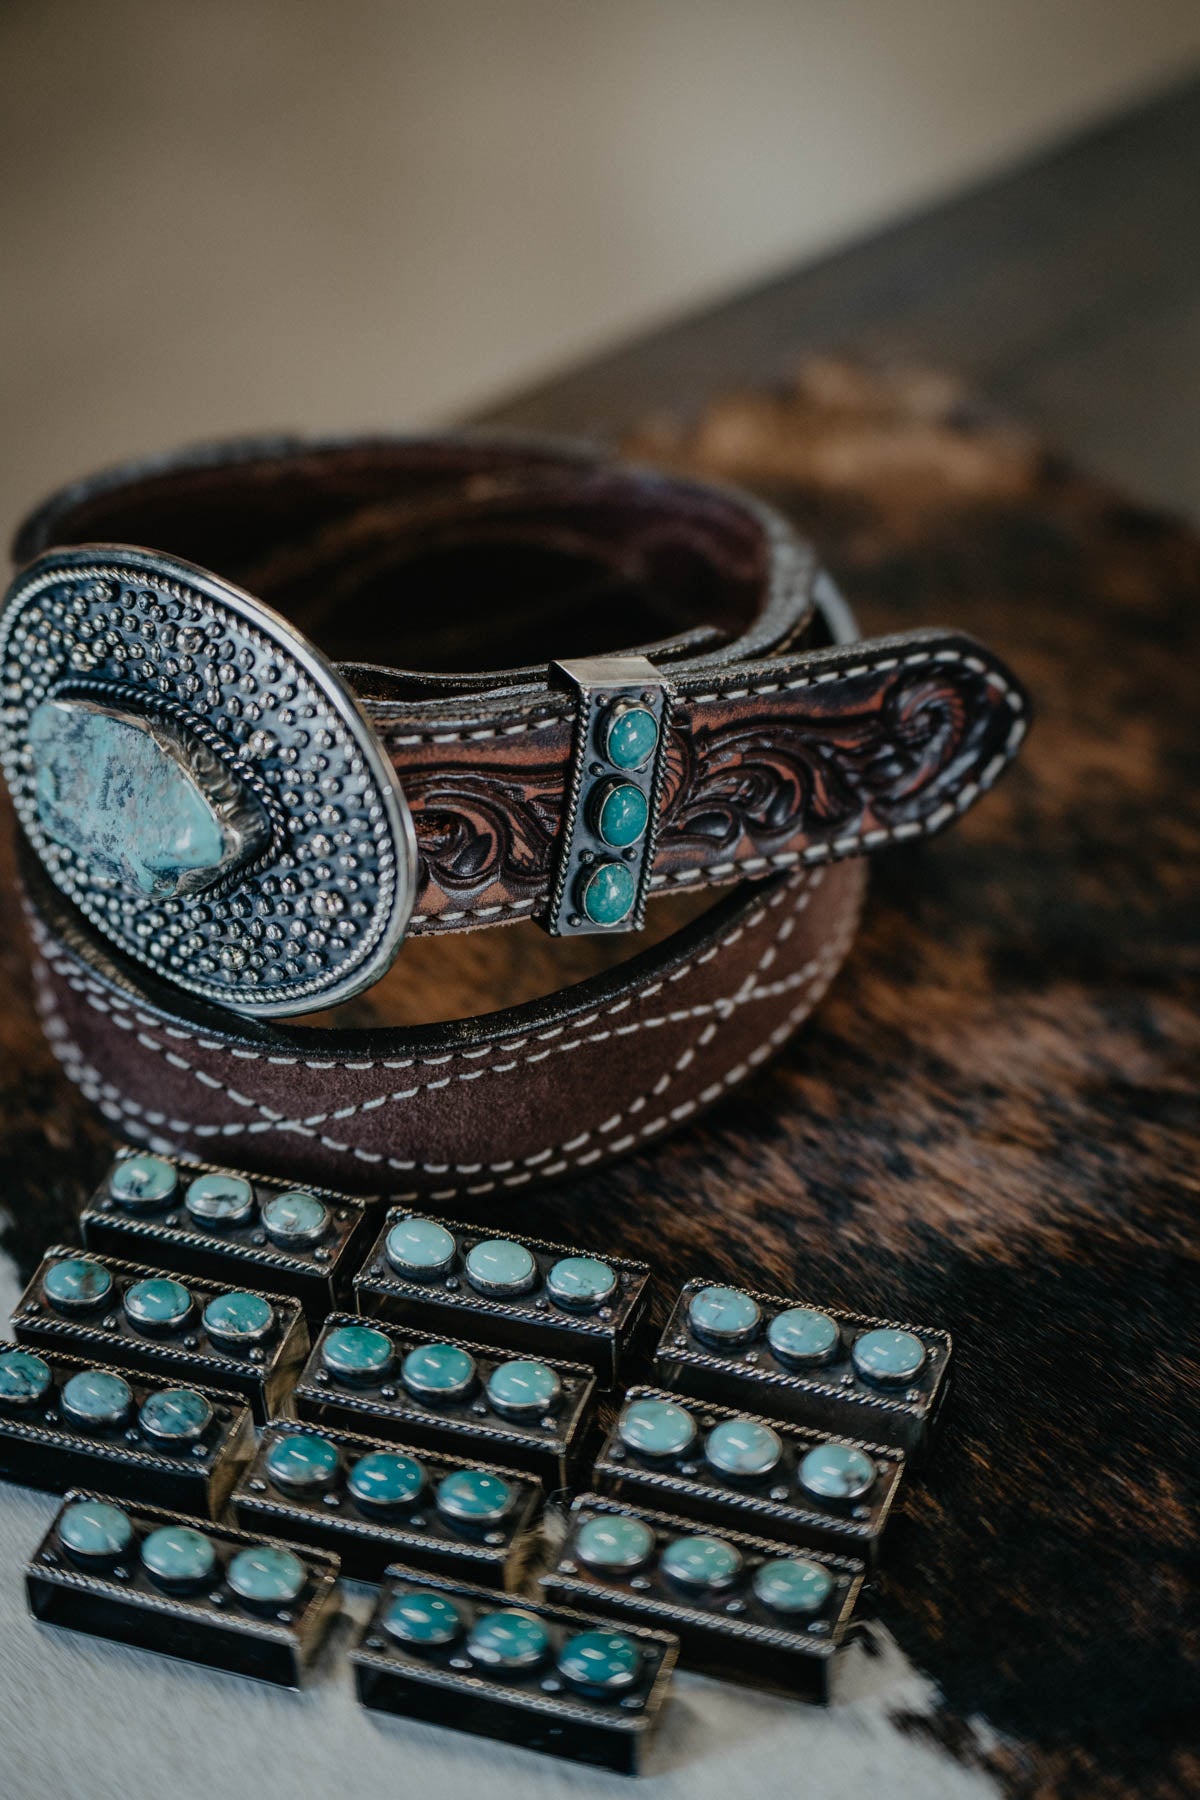 Rope Edge Belt Keeper German Silver with Turquoise Stones by Paige Wallace